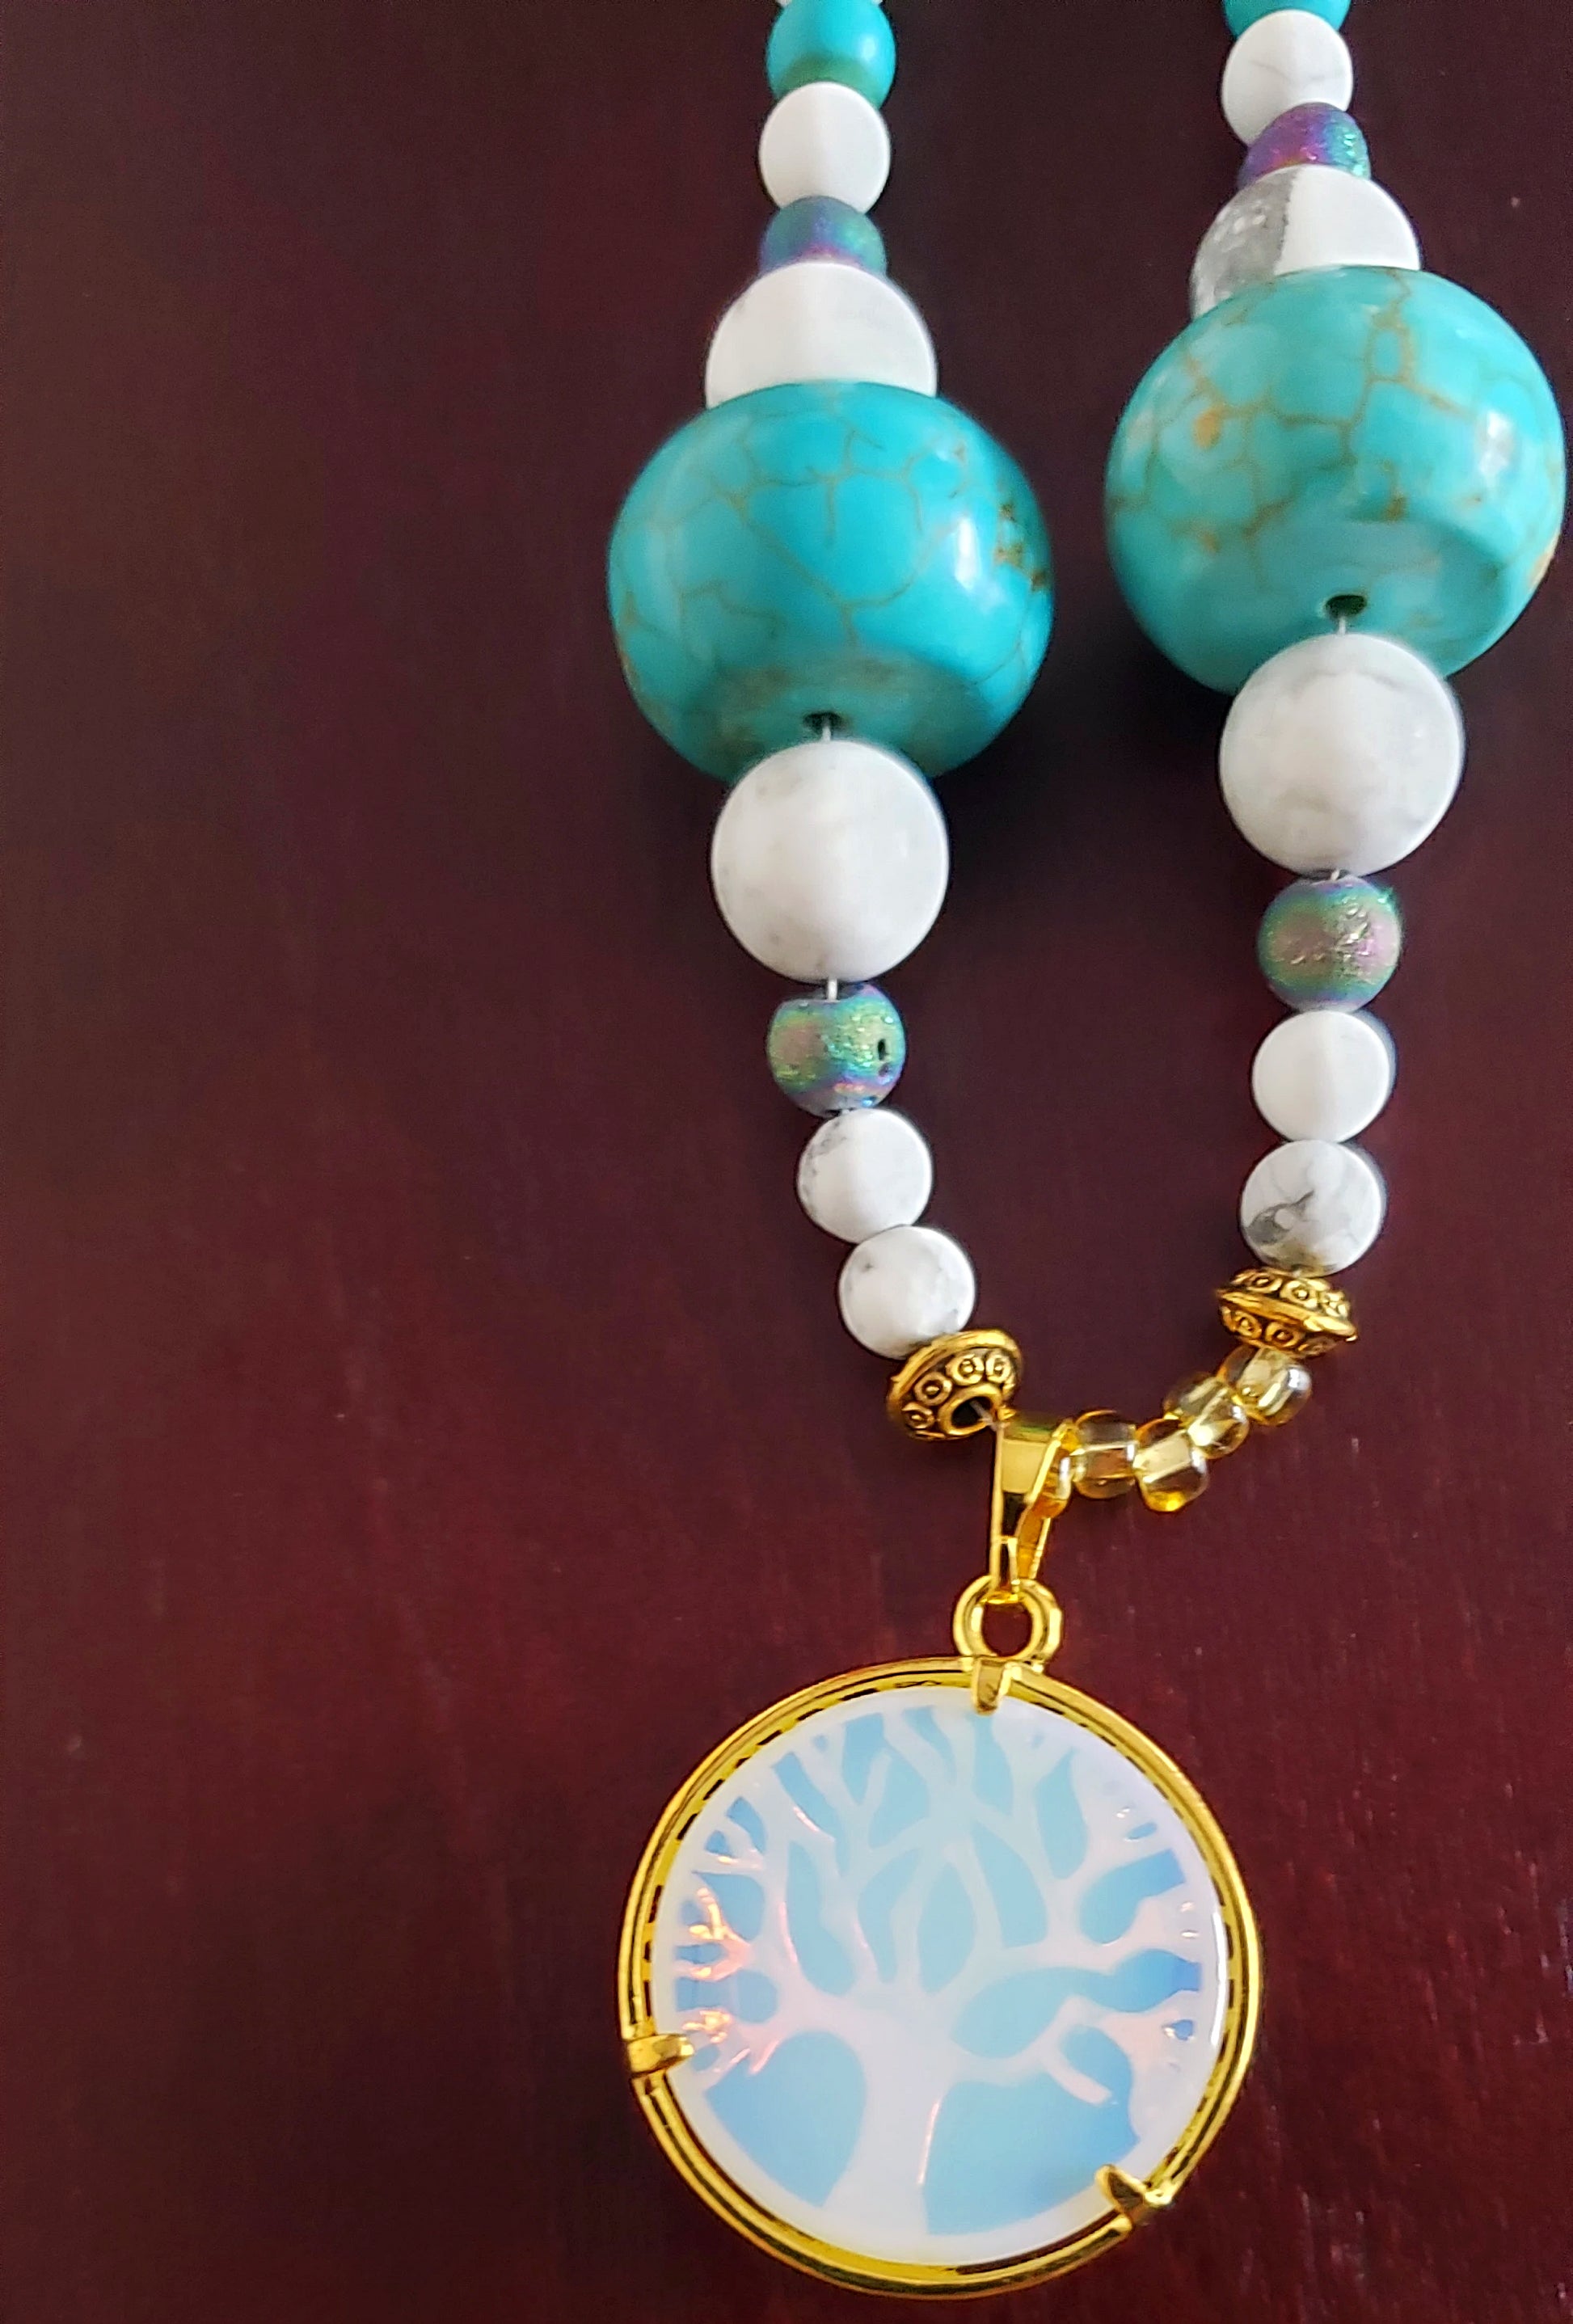 Tree Of Life With Natural White Iridescent Opalite Pendant, White And Turquoise Howlite, Druzy Agate Bead Necklace